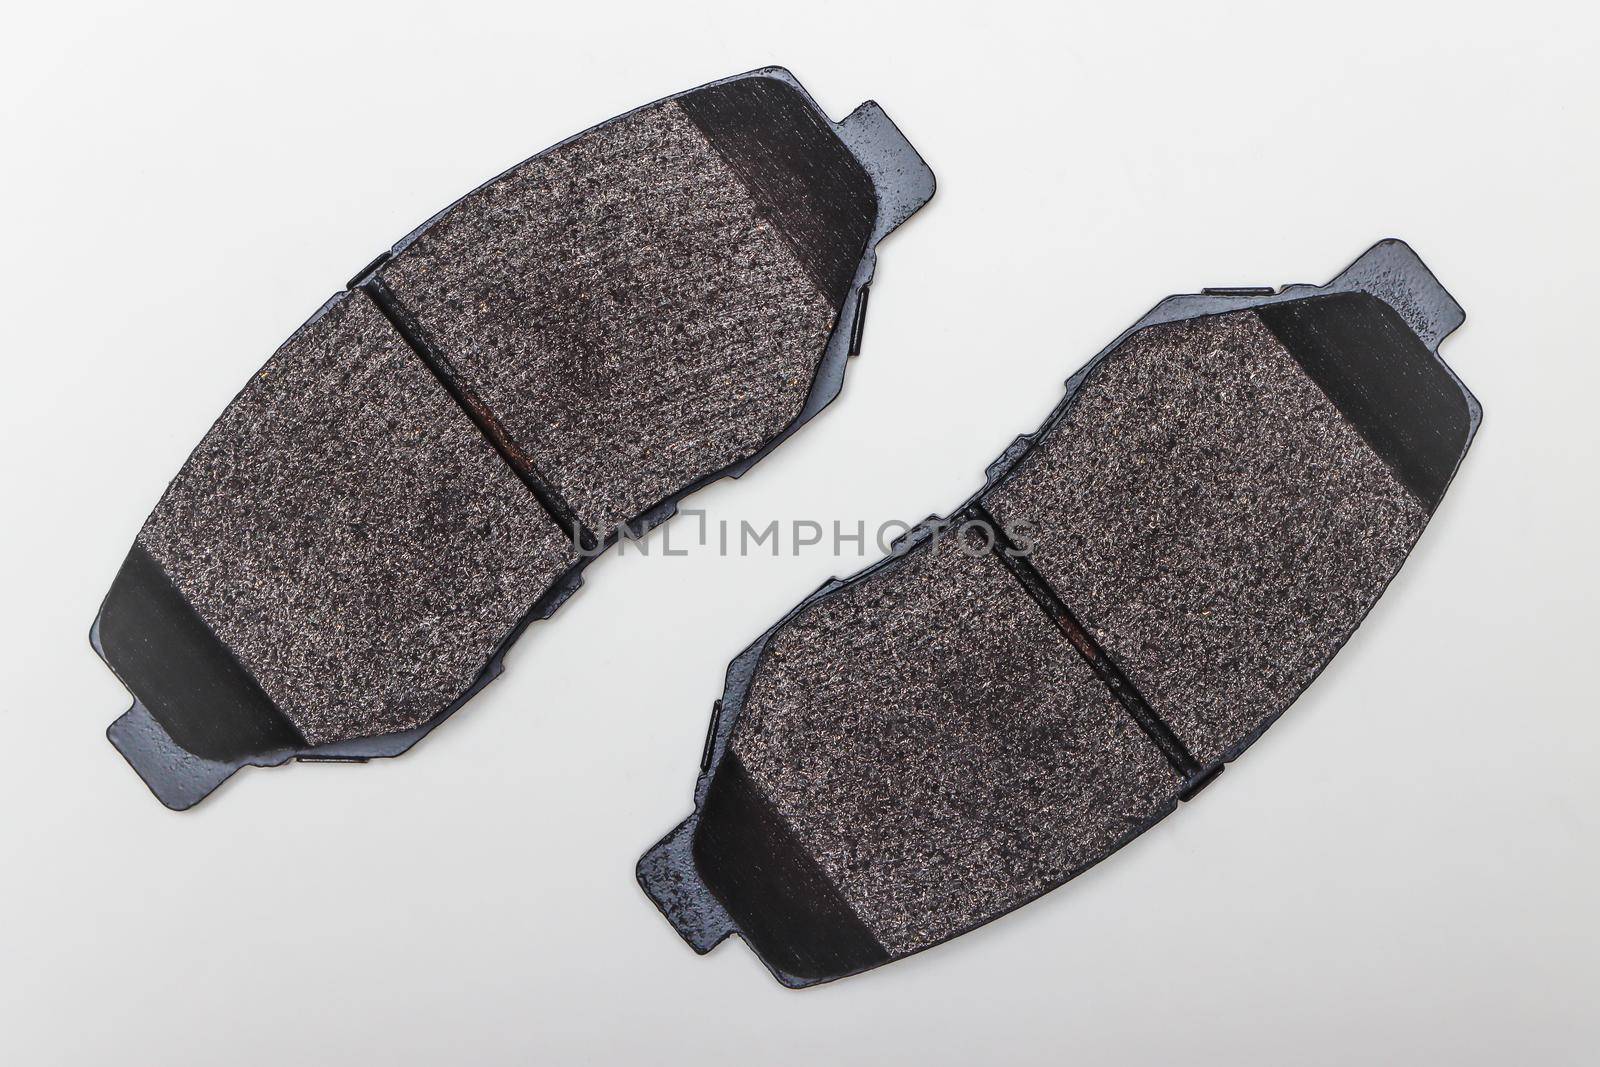 Two brake pads on a flat surface diagonally. Set of spare parts for car brake repair. Details on white background, copy space available. UHD 4K.